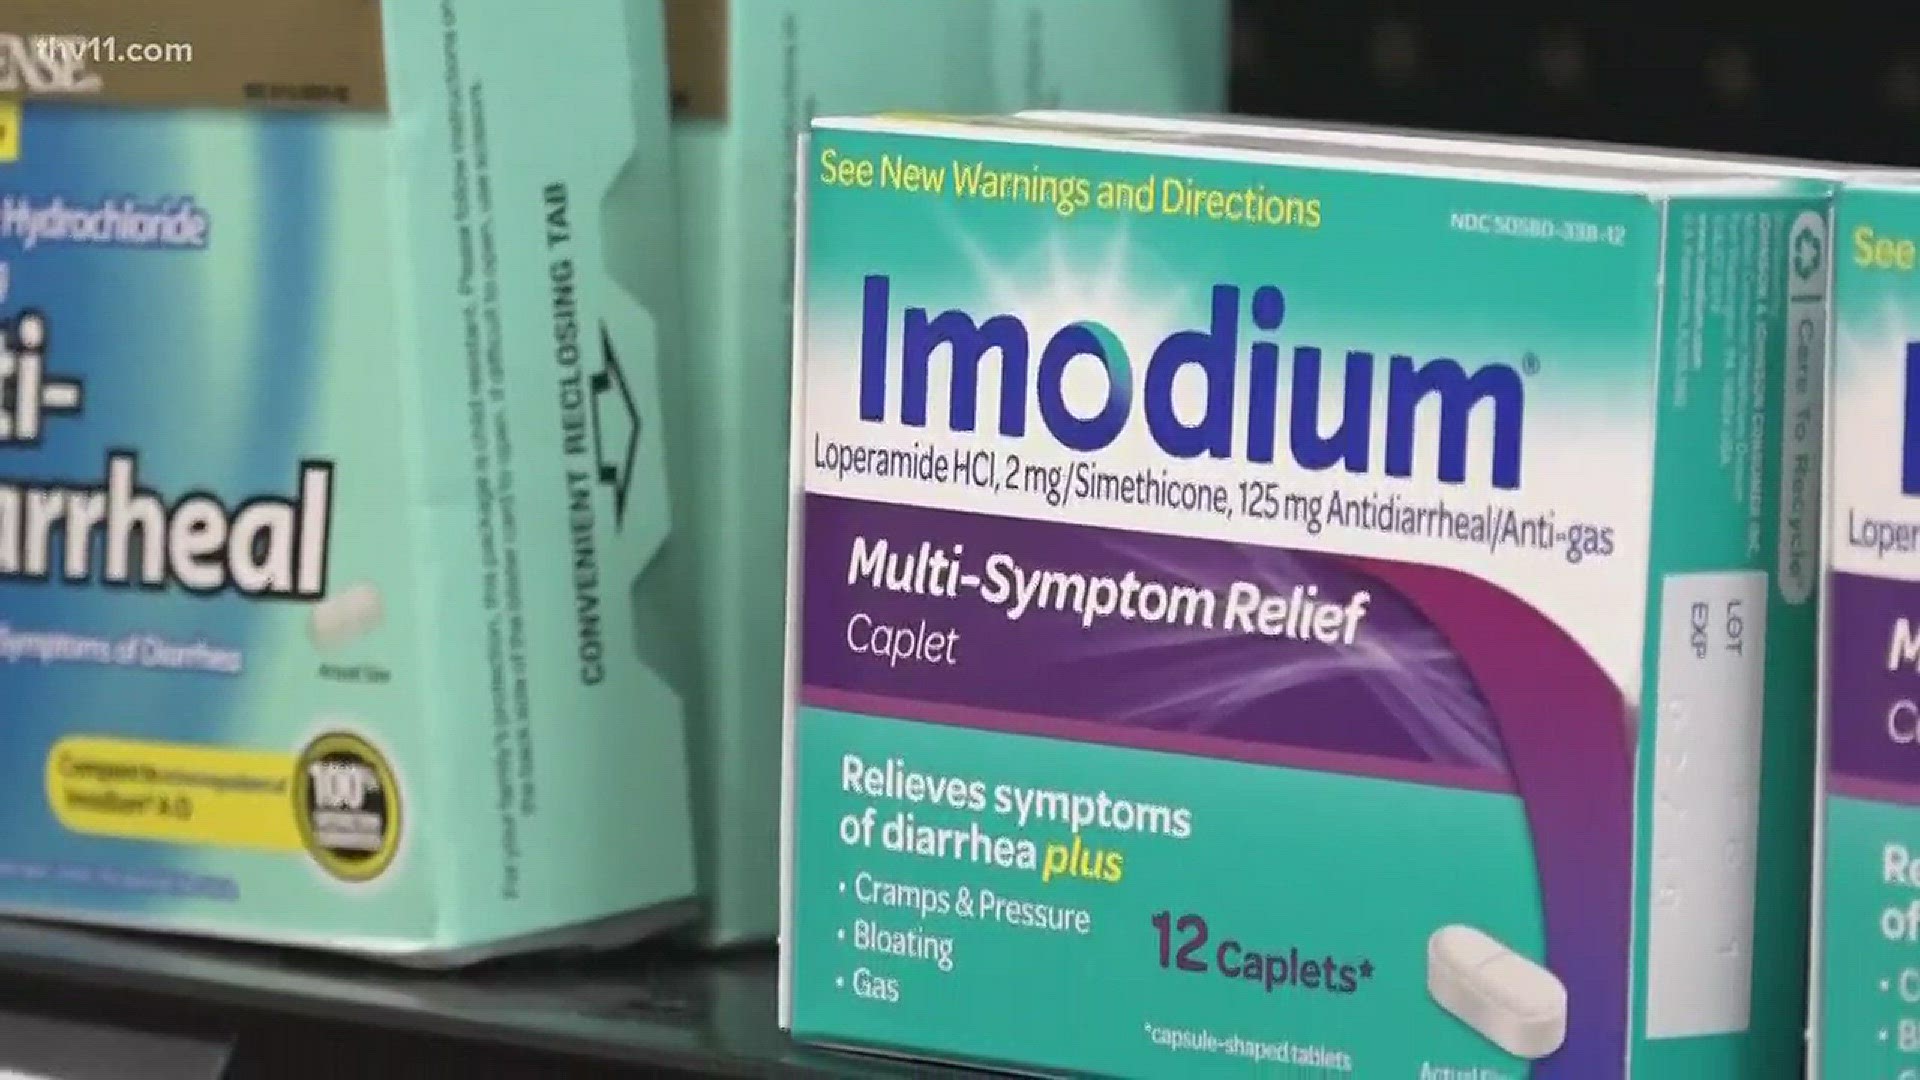 Imodium is being used by opioid addicts when they can't take opioids.